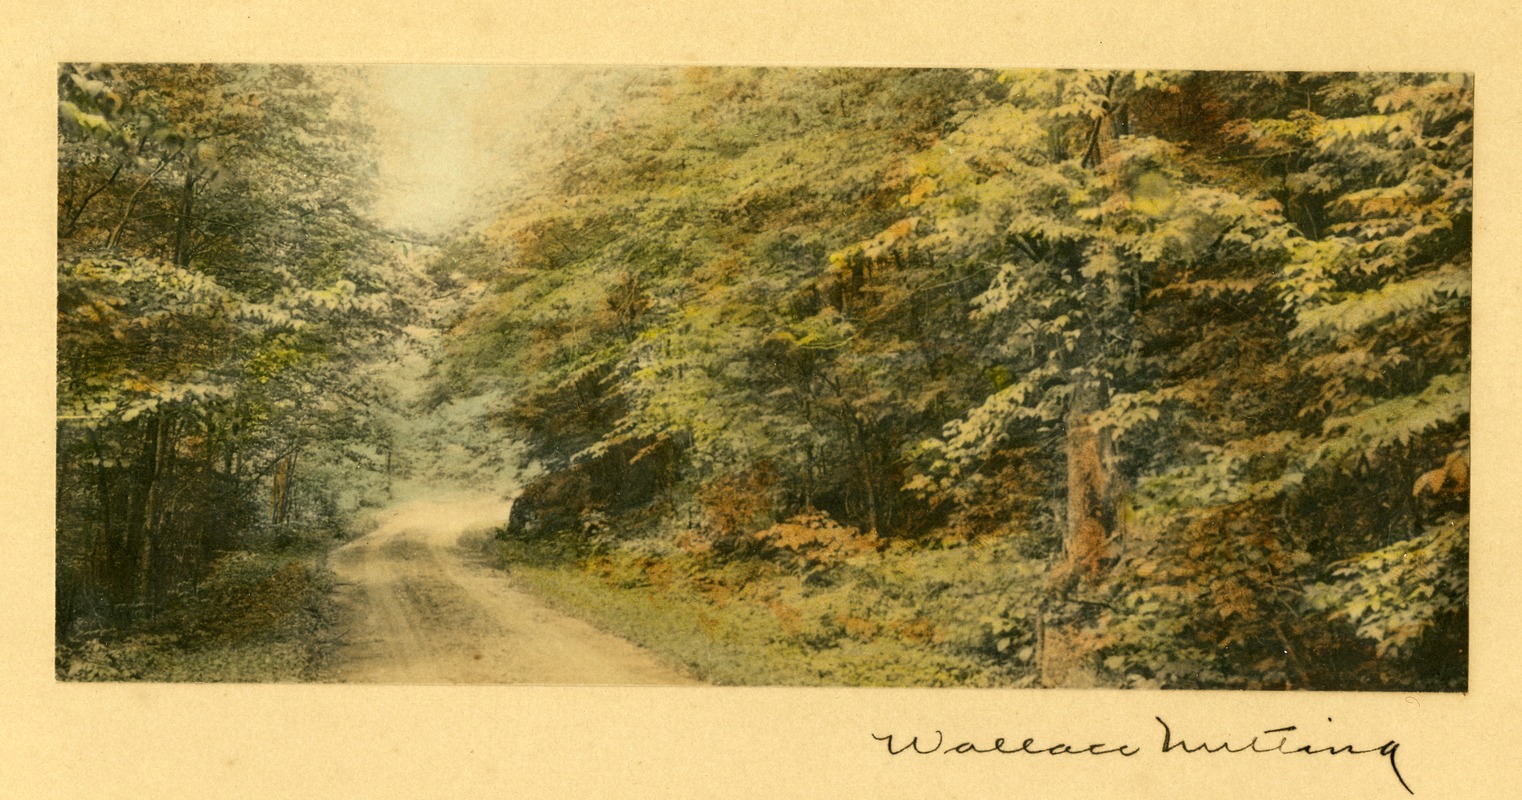 Wallace Nutting' untitled signed photograph of a country road lined with  trees - Digital Commonwealth